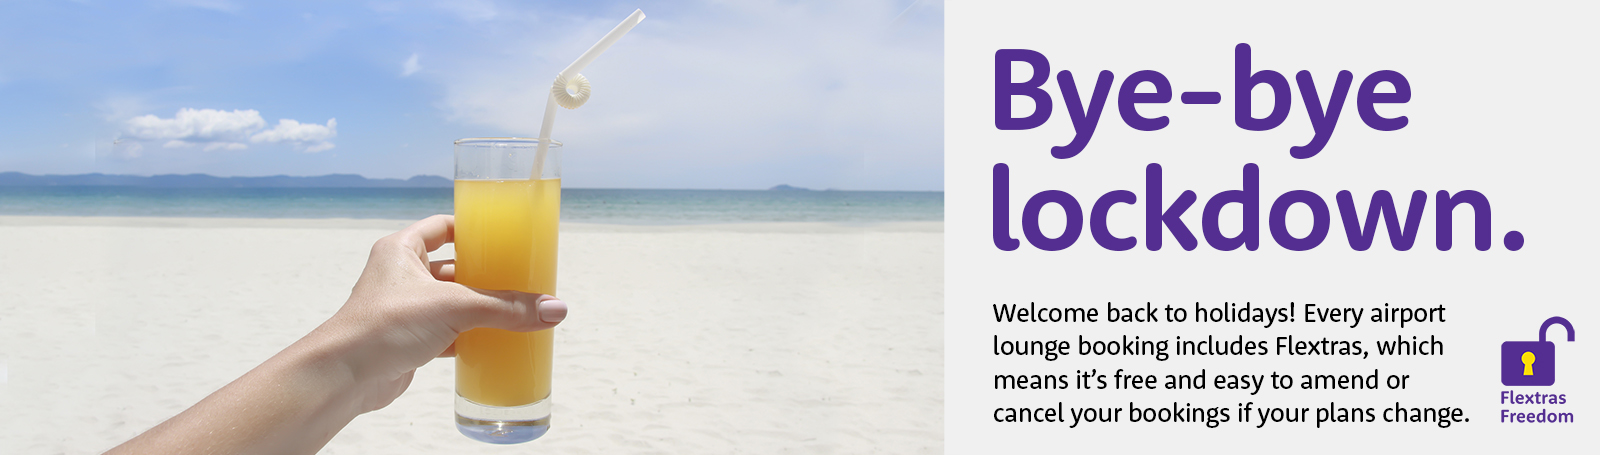 airport lounges welcome back holidays - all bookings include flextras